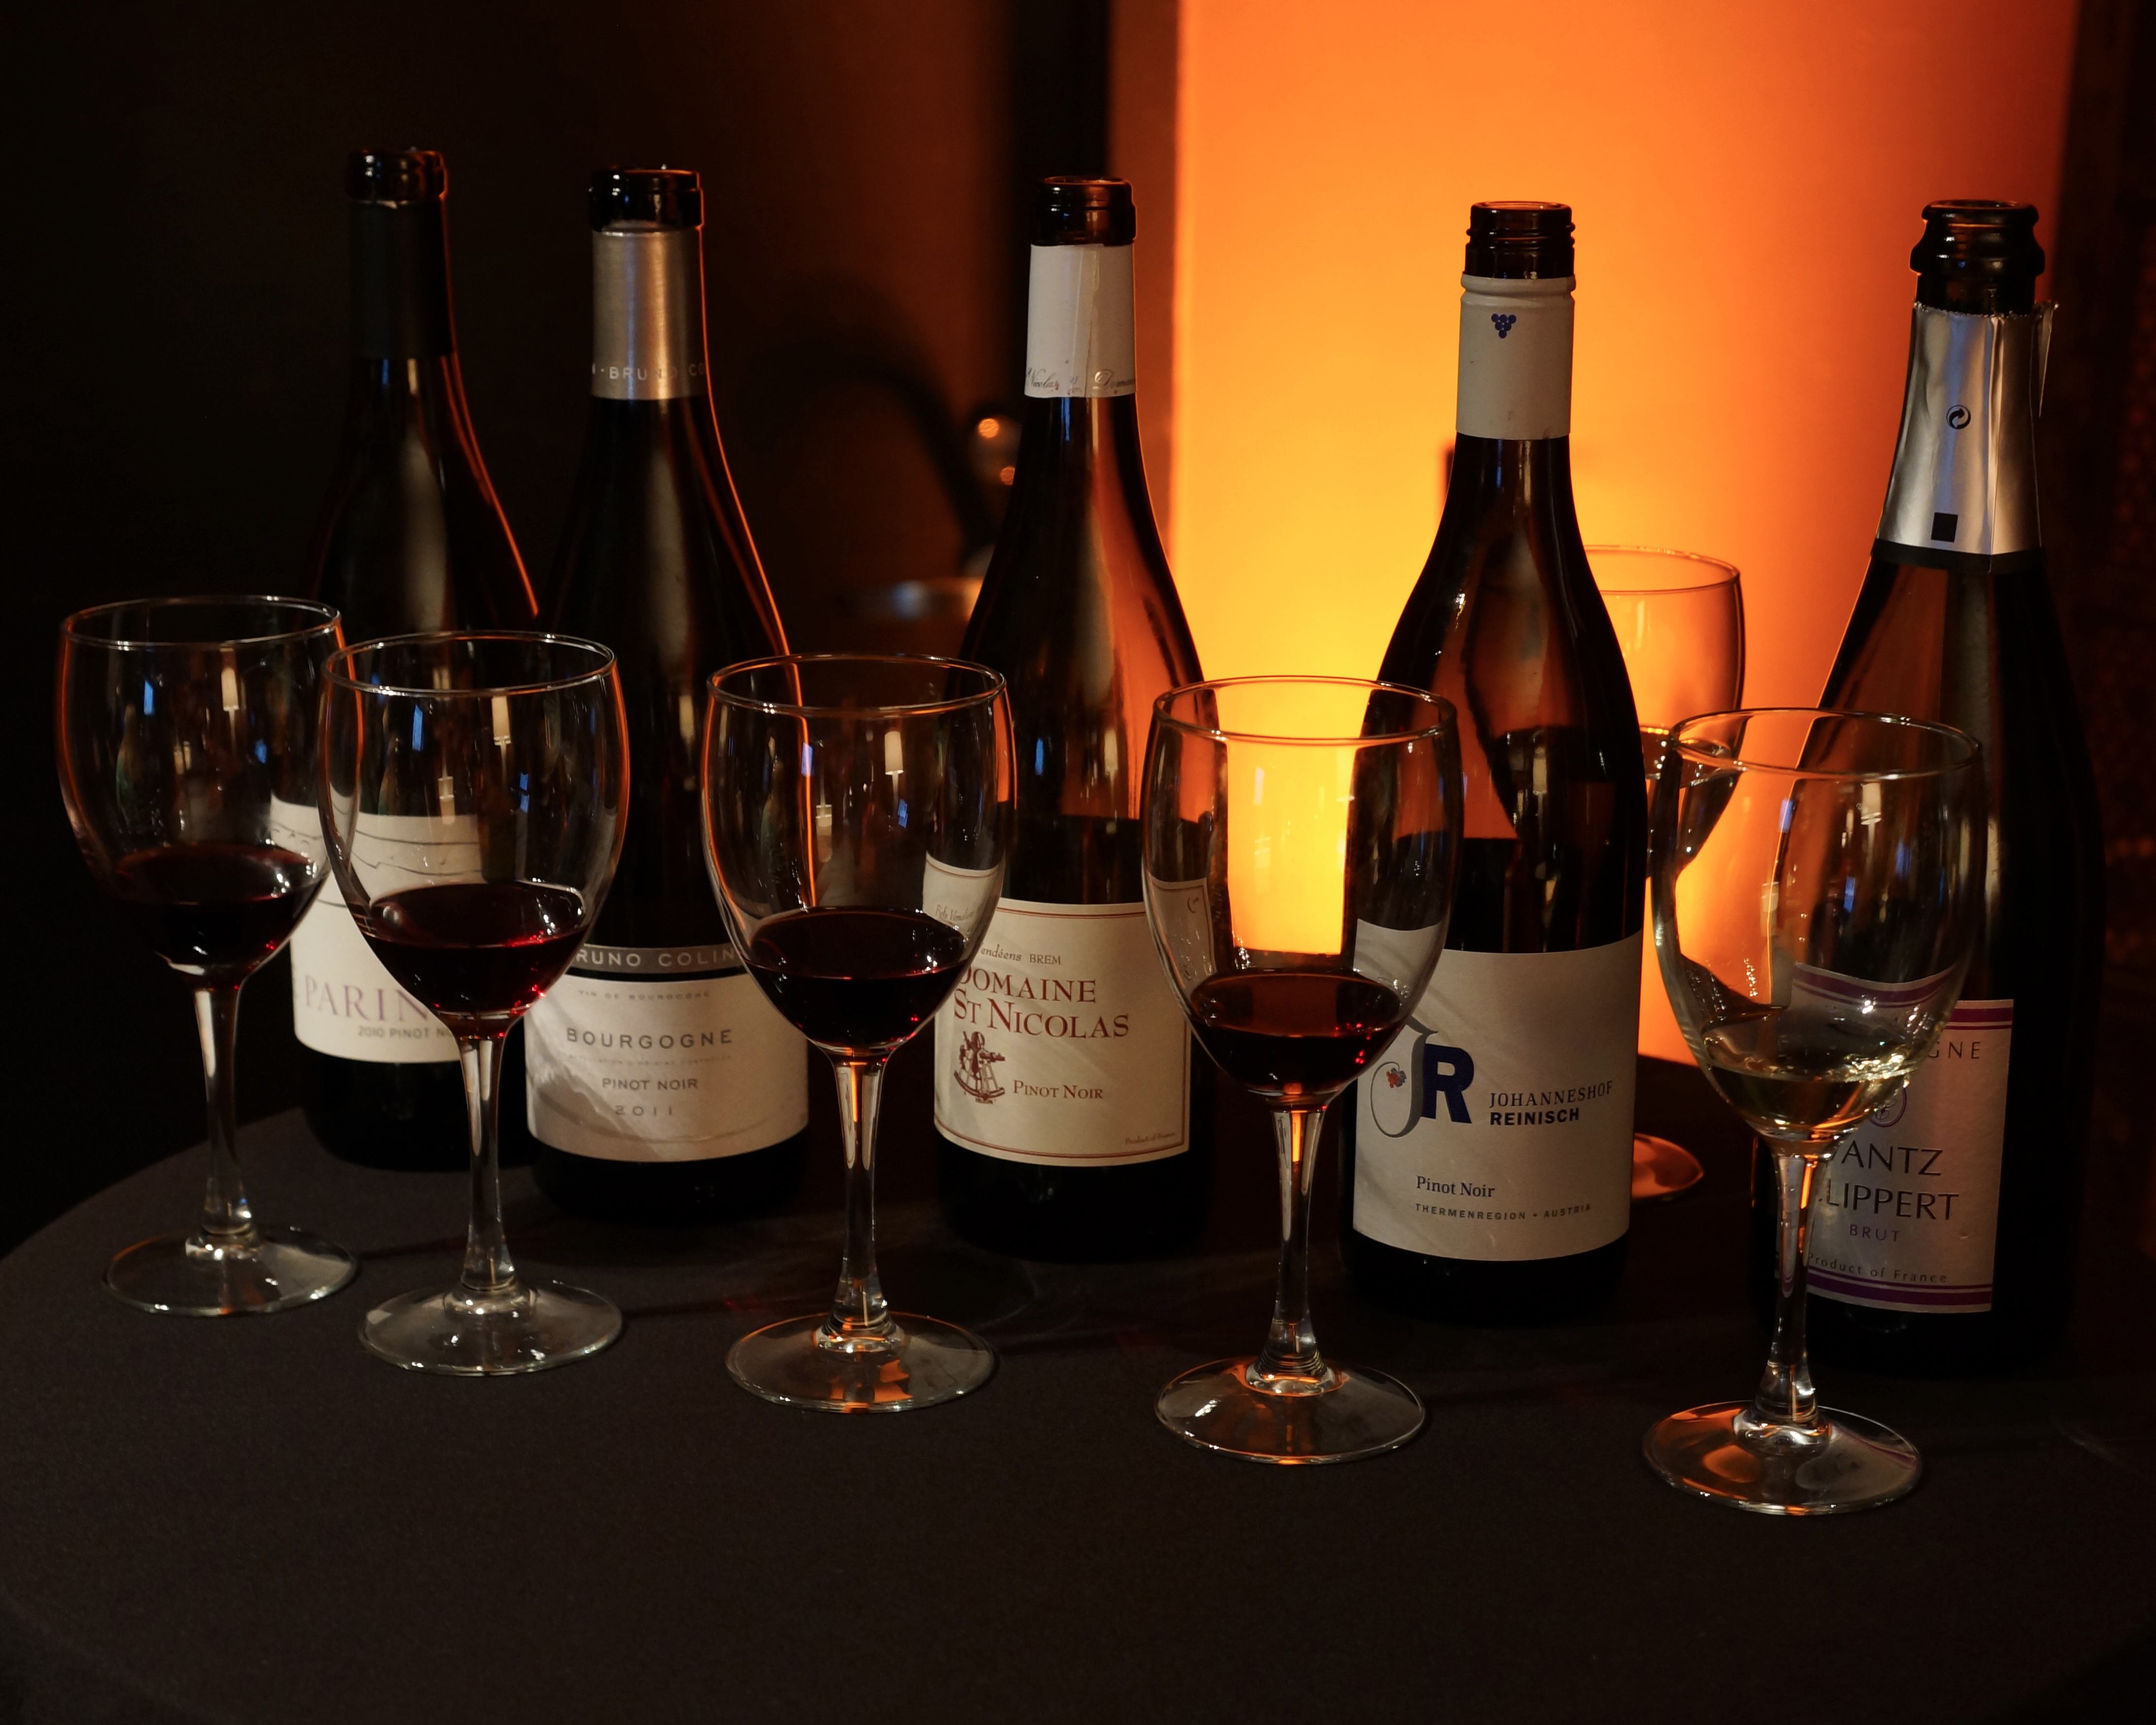 The 6th Annual NYC Winter Wine Festival returns to the Best Buy Theater on February 7, 2015, with sessions at 3-6pm and 8-11pm.